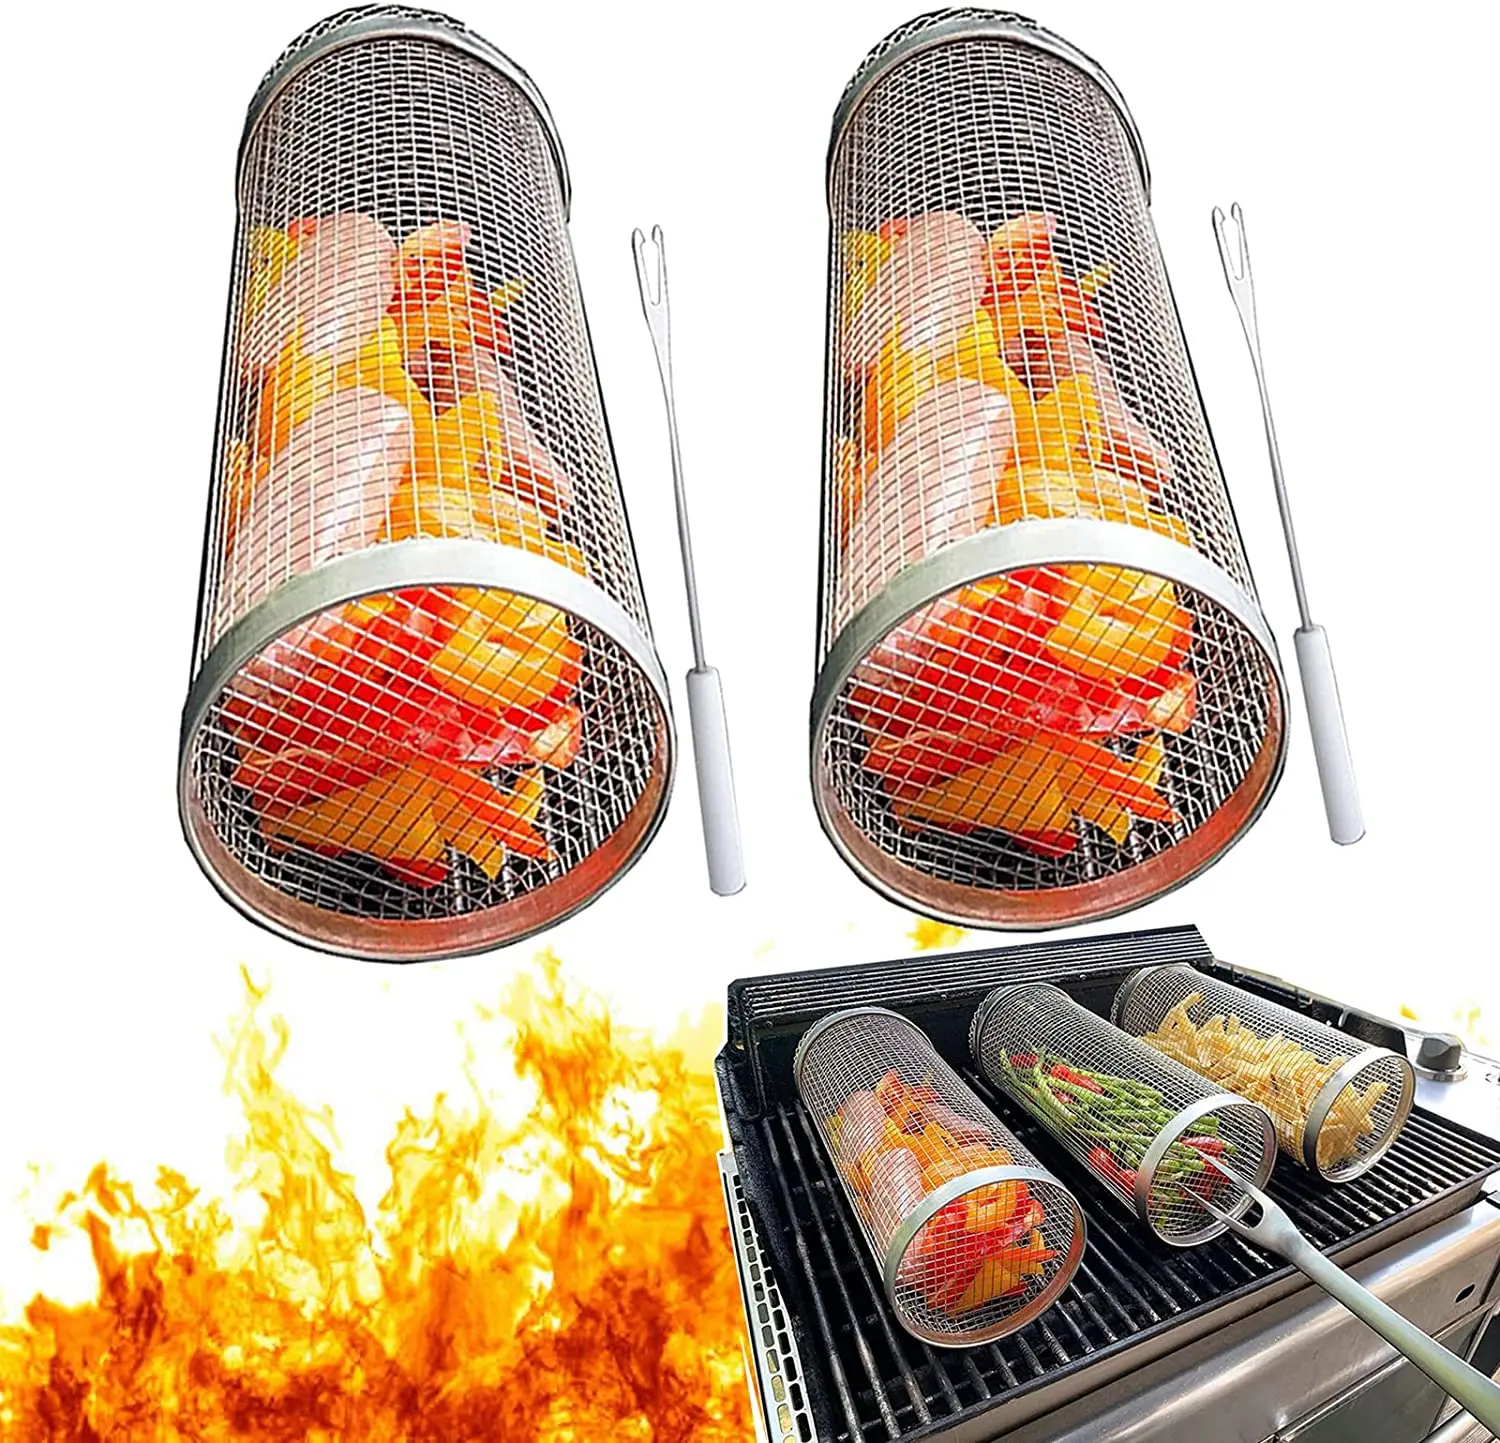 

Rolling Grilling Basket - Greatest Grilling Basket Ever Round Stainless Steel BBQ Grill Mesh Camping Barbecue Rack